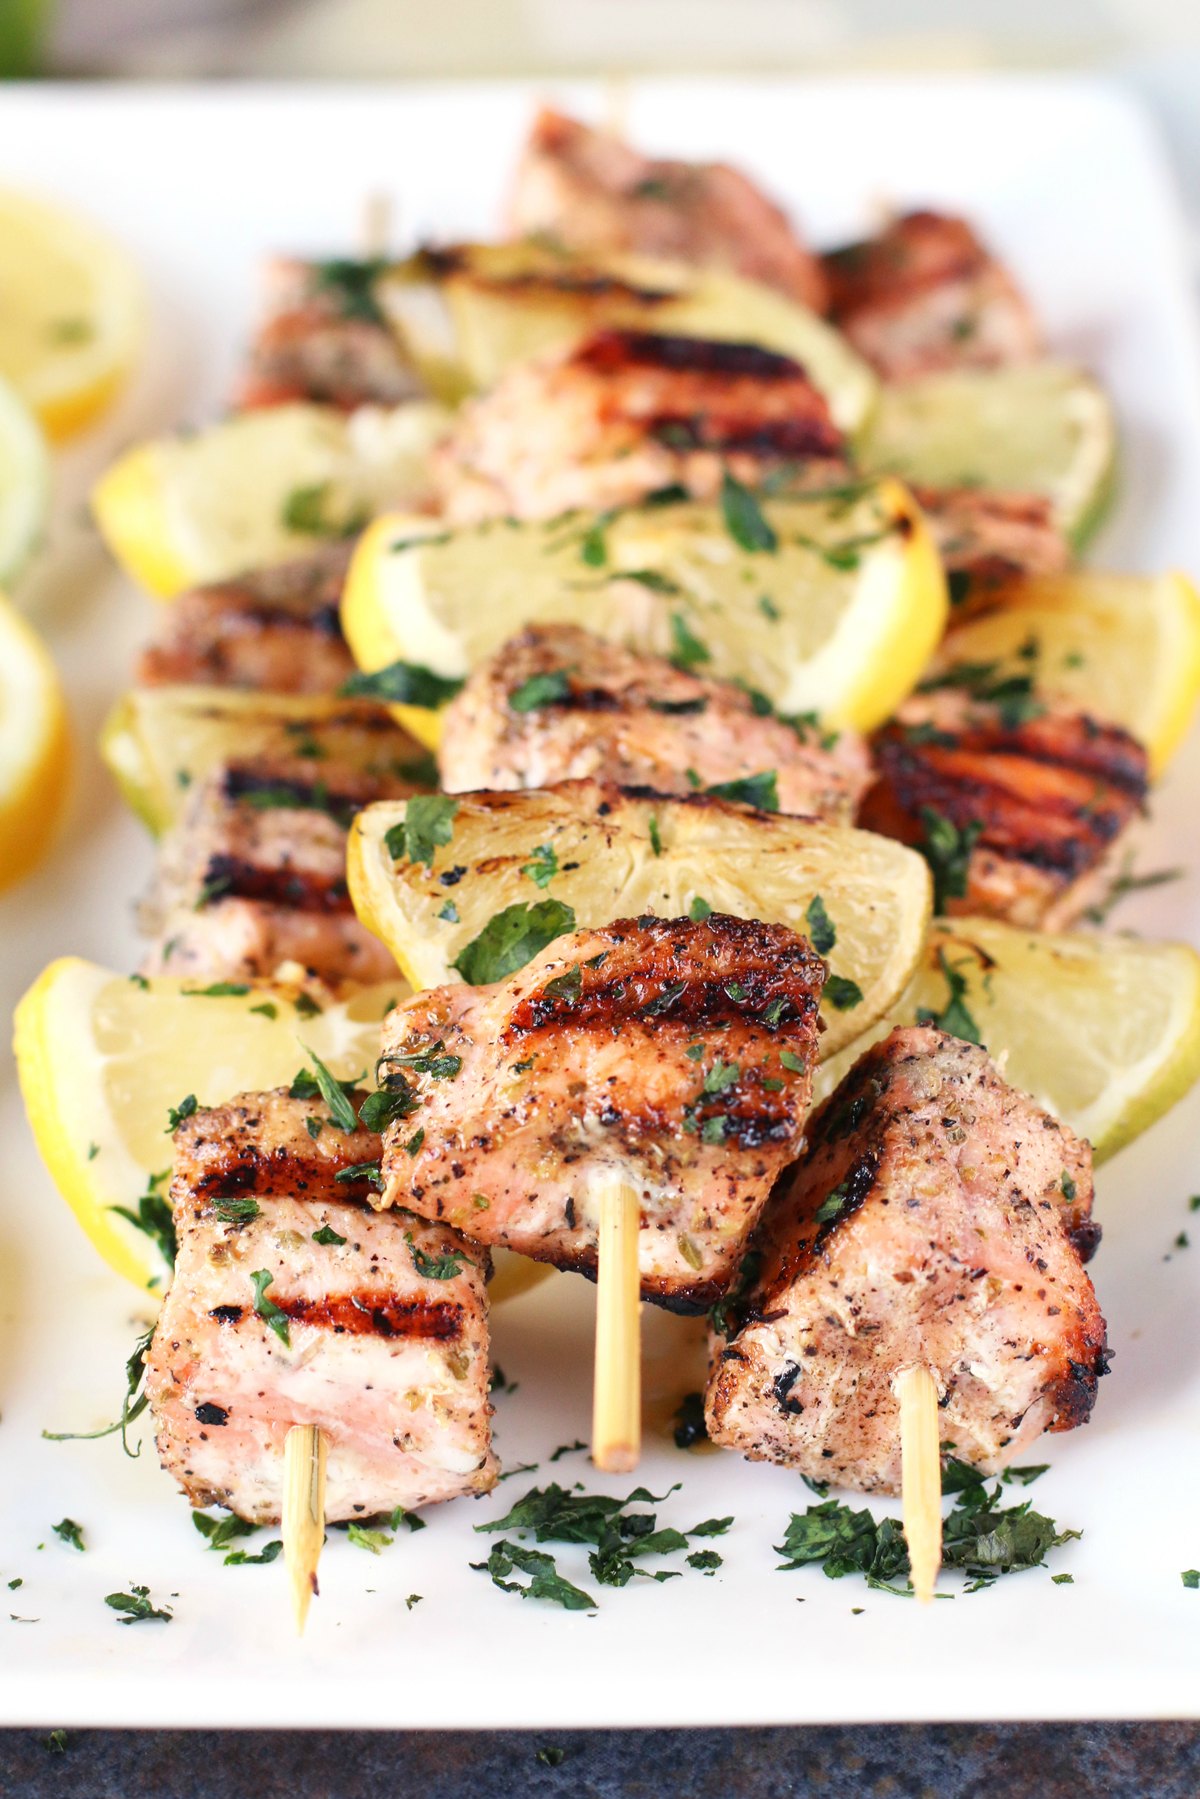 A platter of salmon skewers cooked and topped with diced parsley